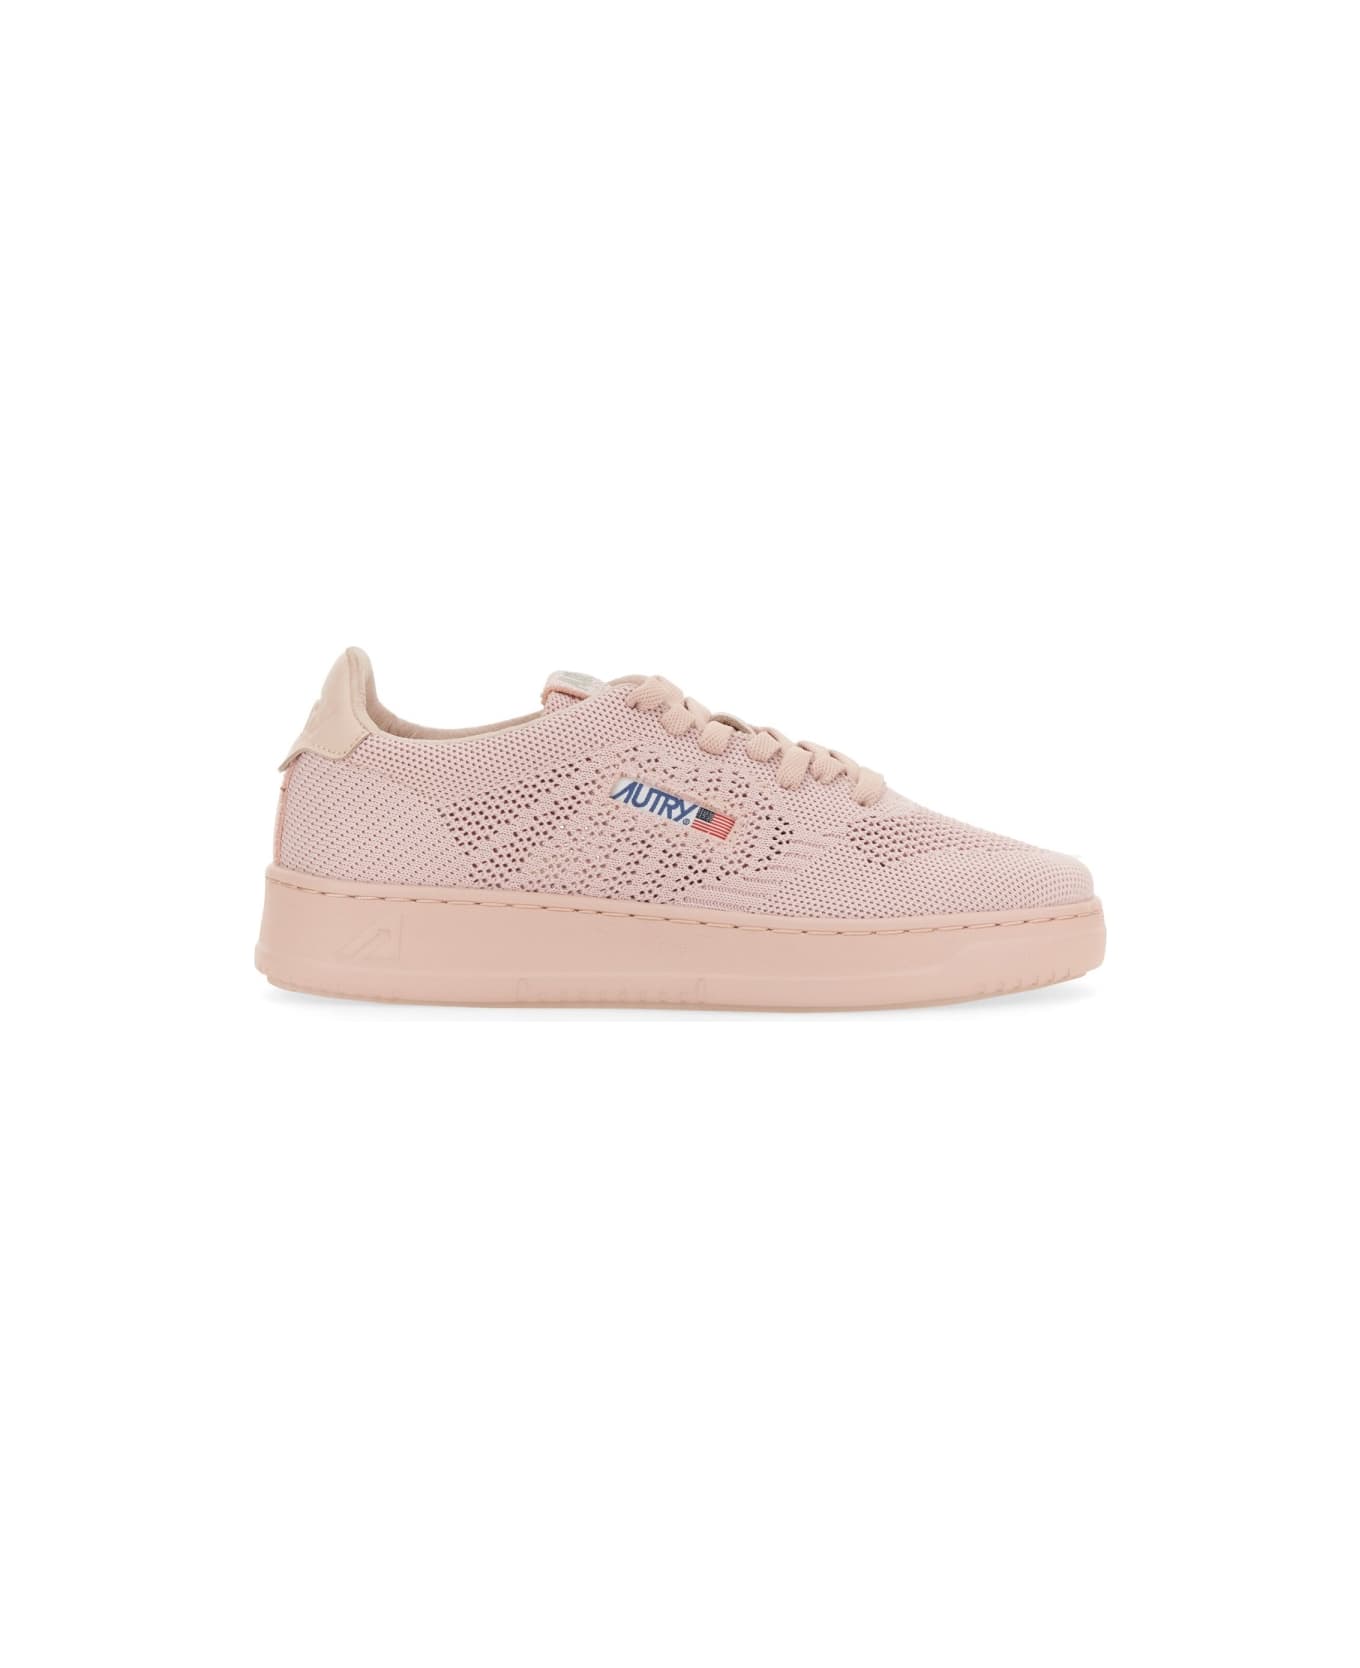 Autry Pink Easeknit Low Sneakers - Pink スニーカー